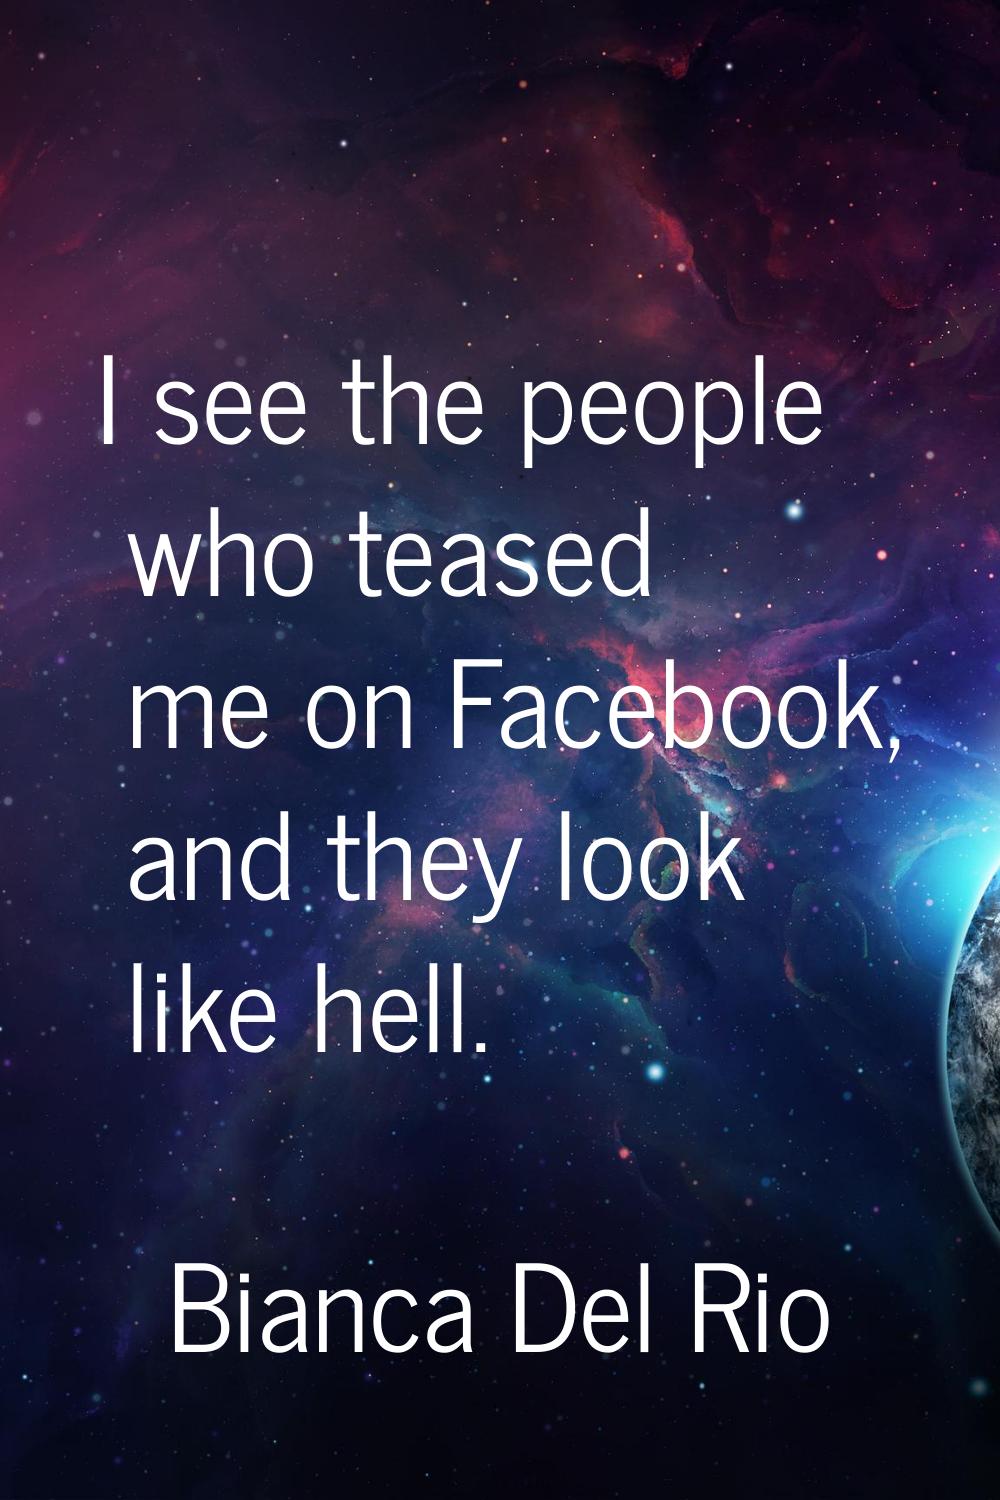 I see the people who teased me on Facebook, and they look like hell.